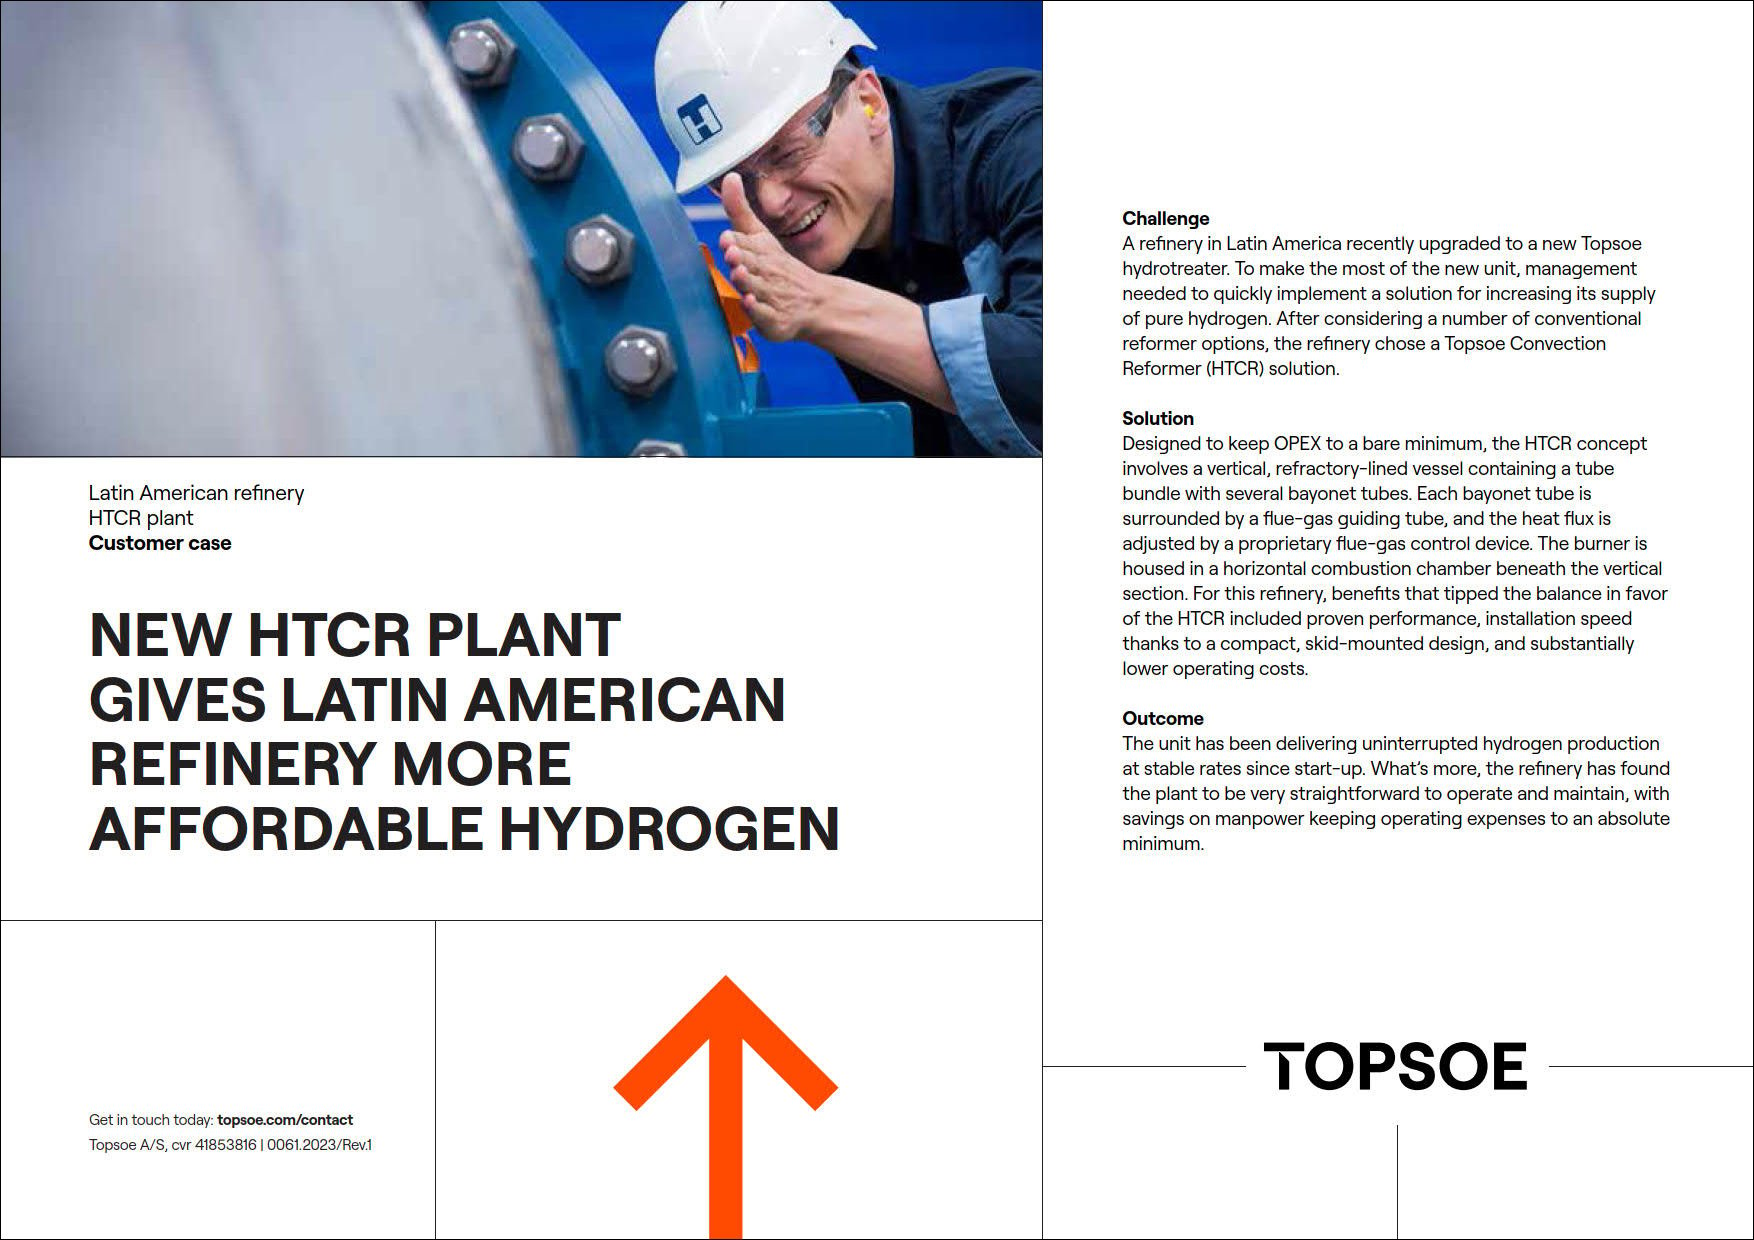 New HTCR plant gives Latin American refinery more affordable hydrogen9